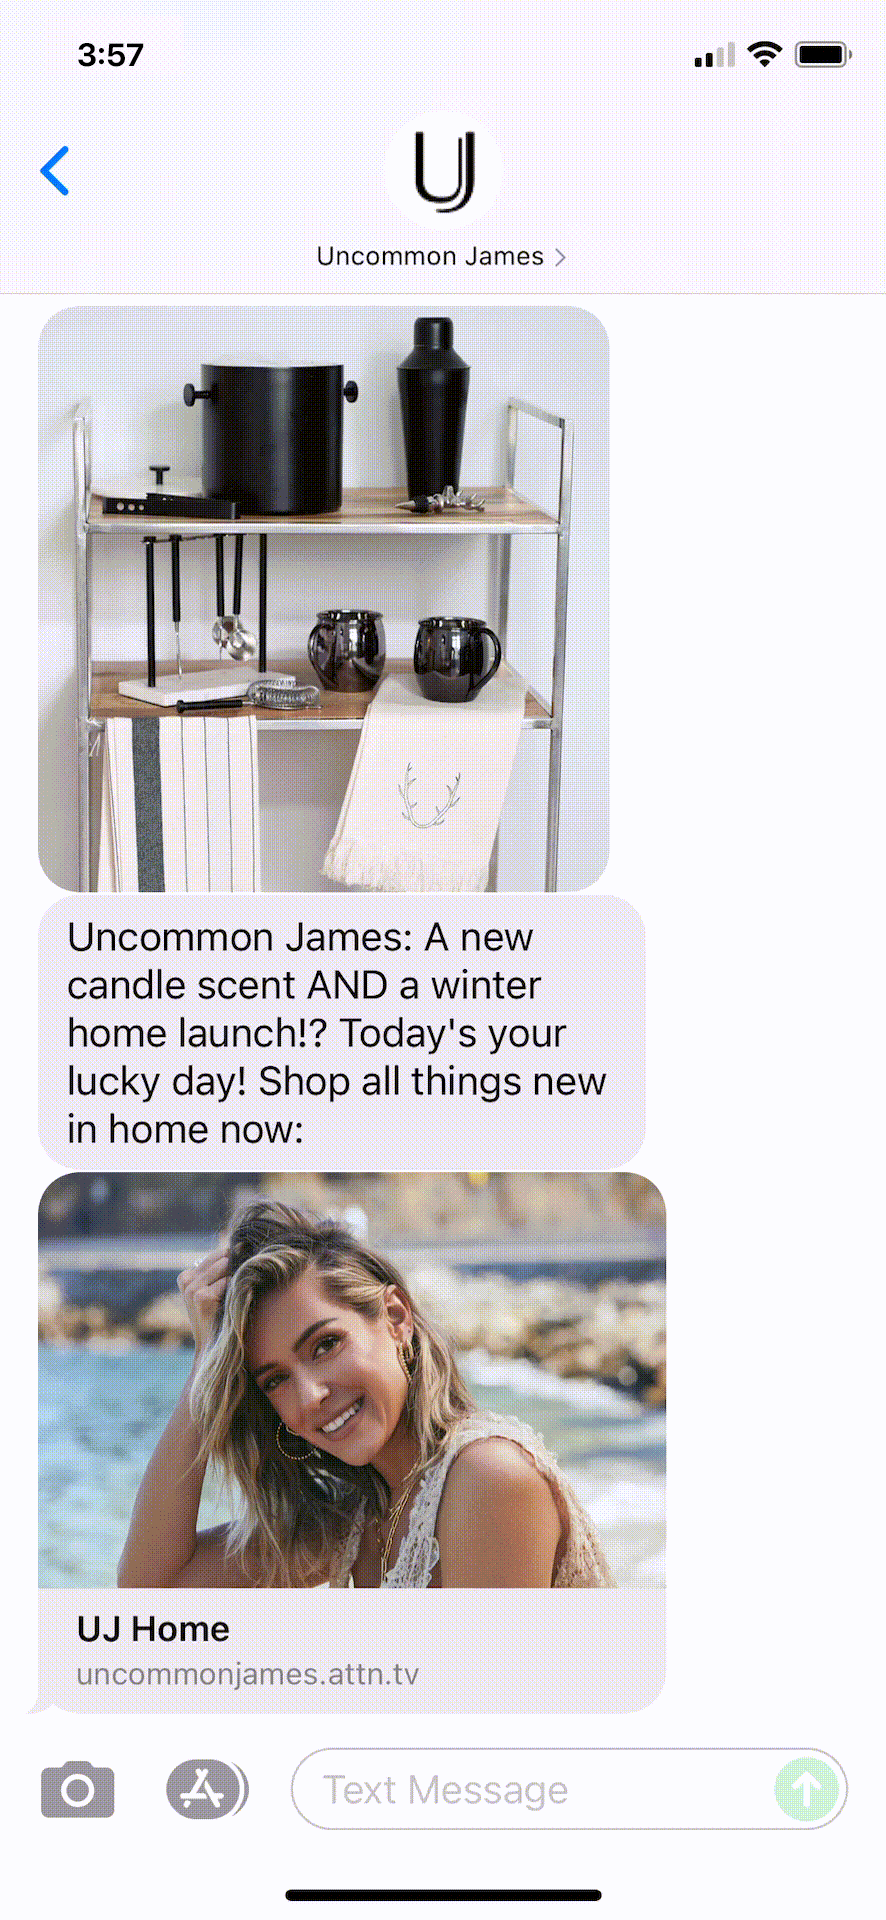 Uncommon-James-Text-Message-Marketing-Example-10.28.2021